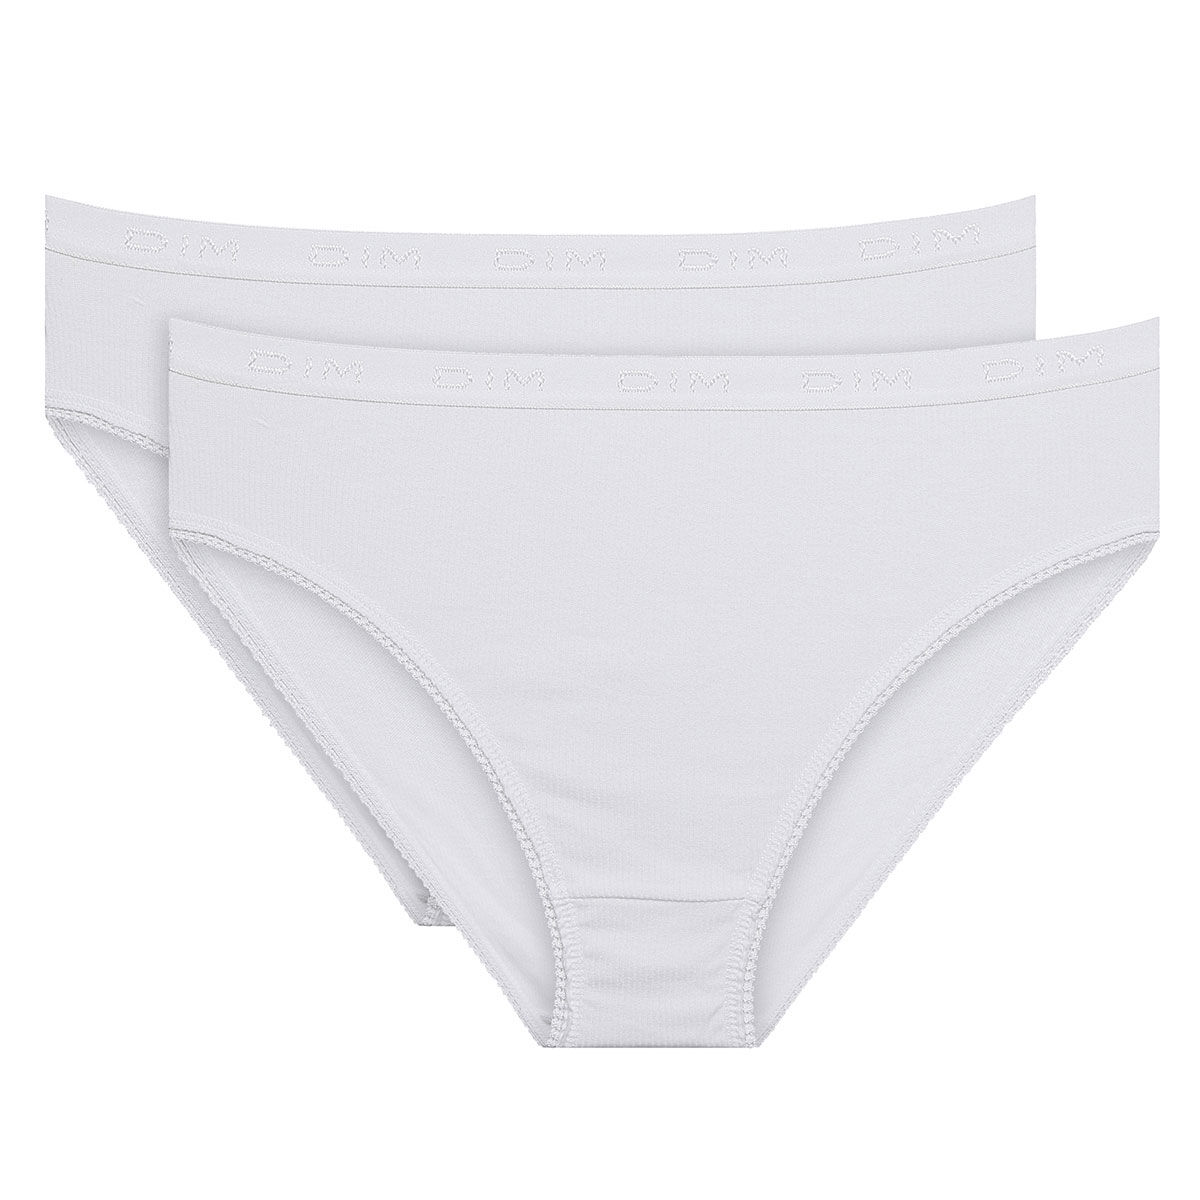 petites culottes blanches